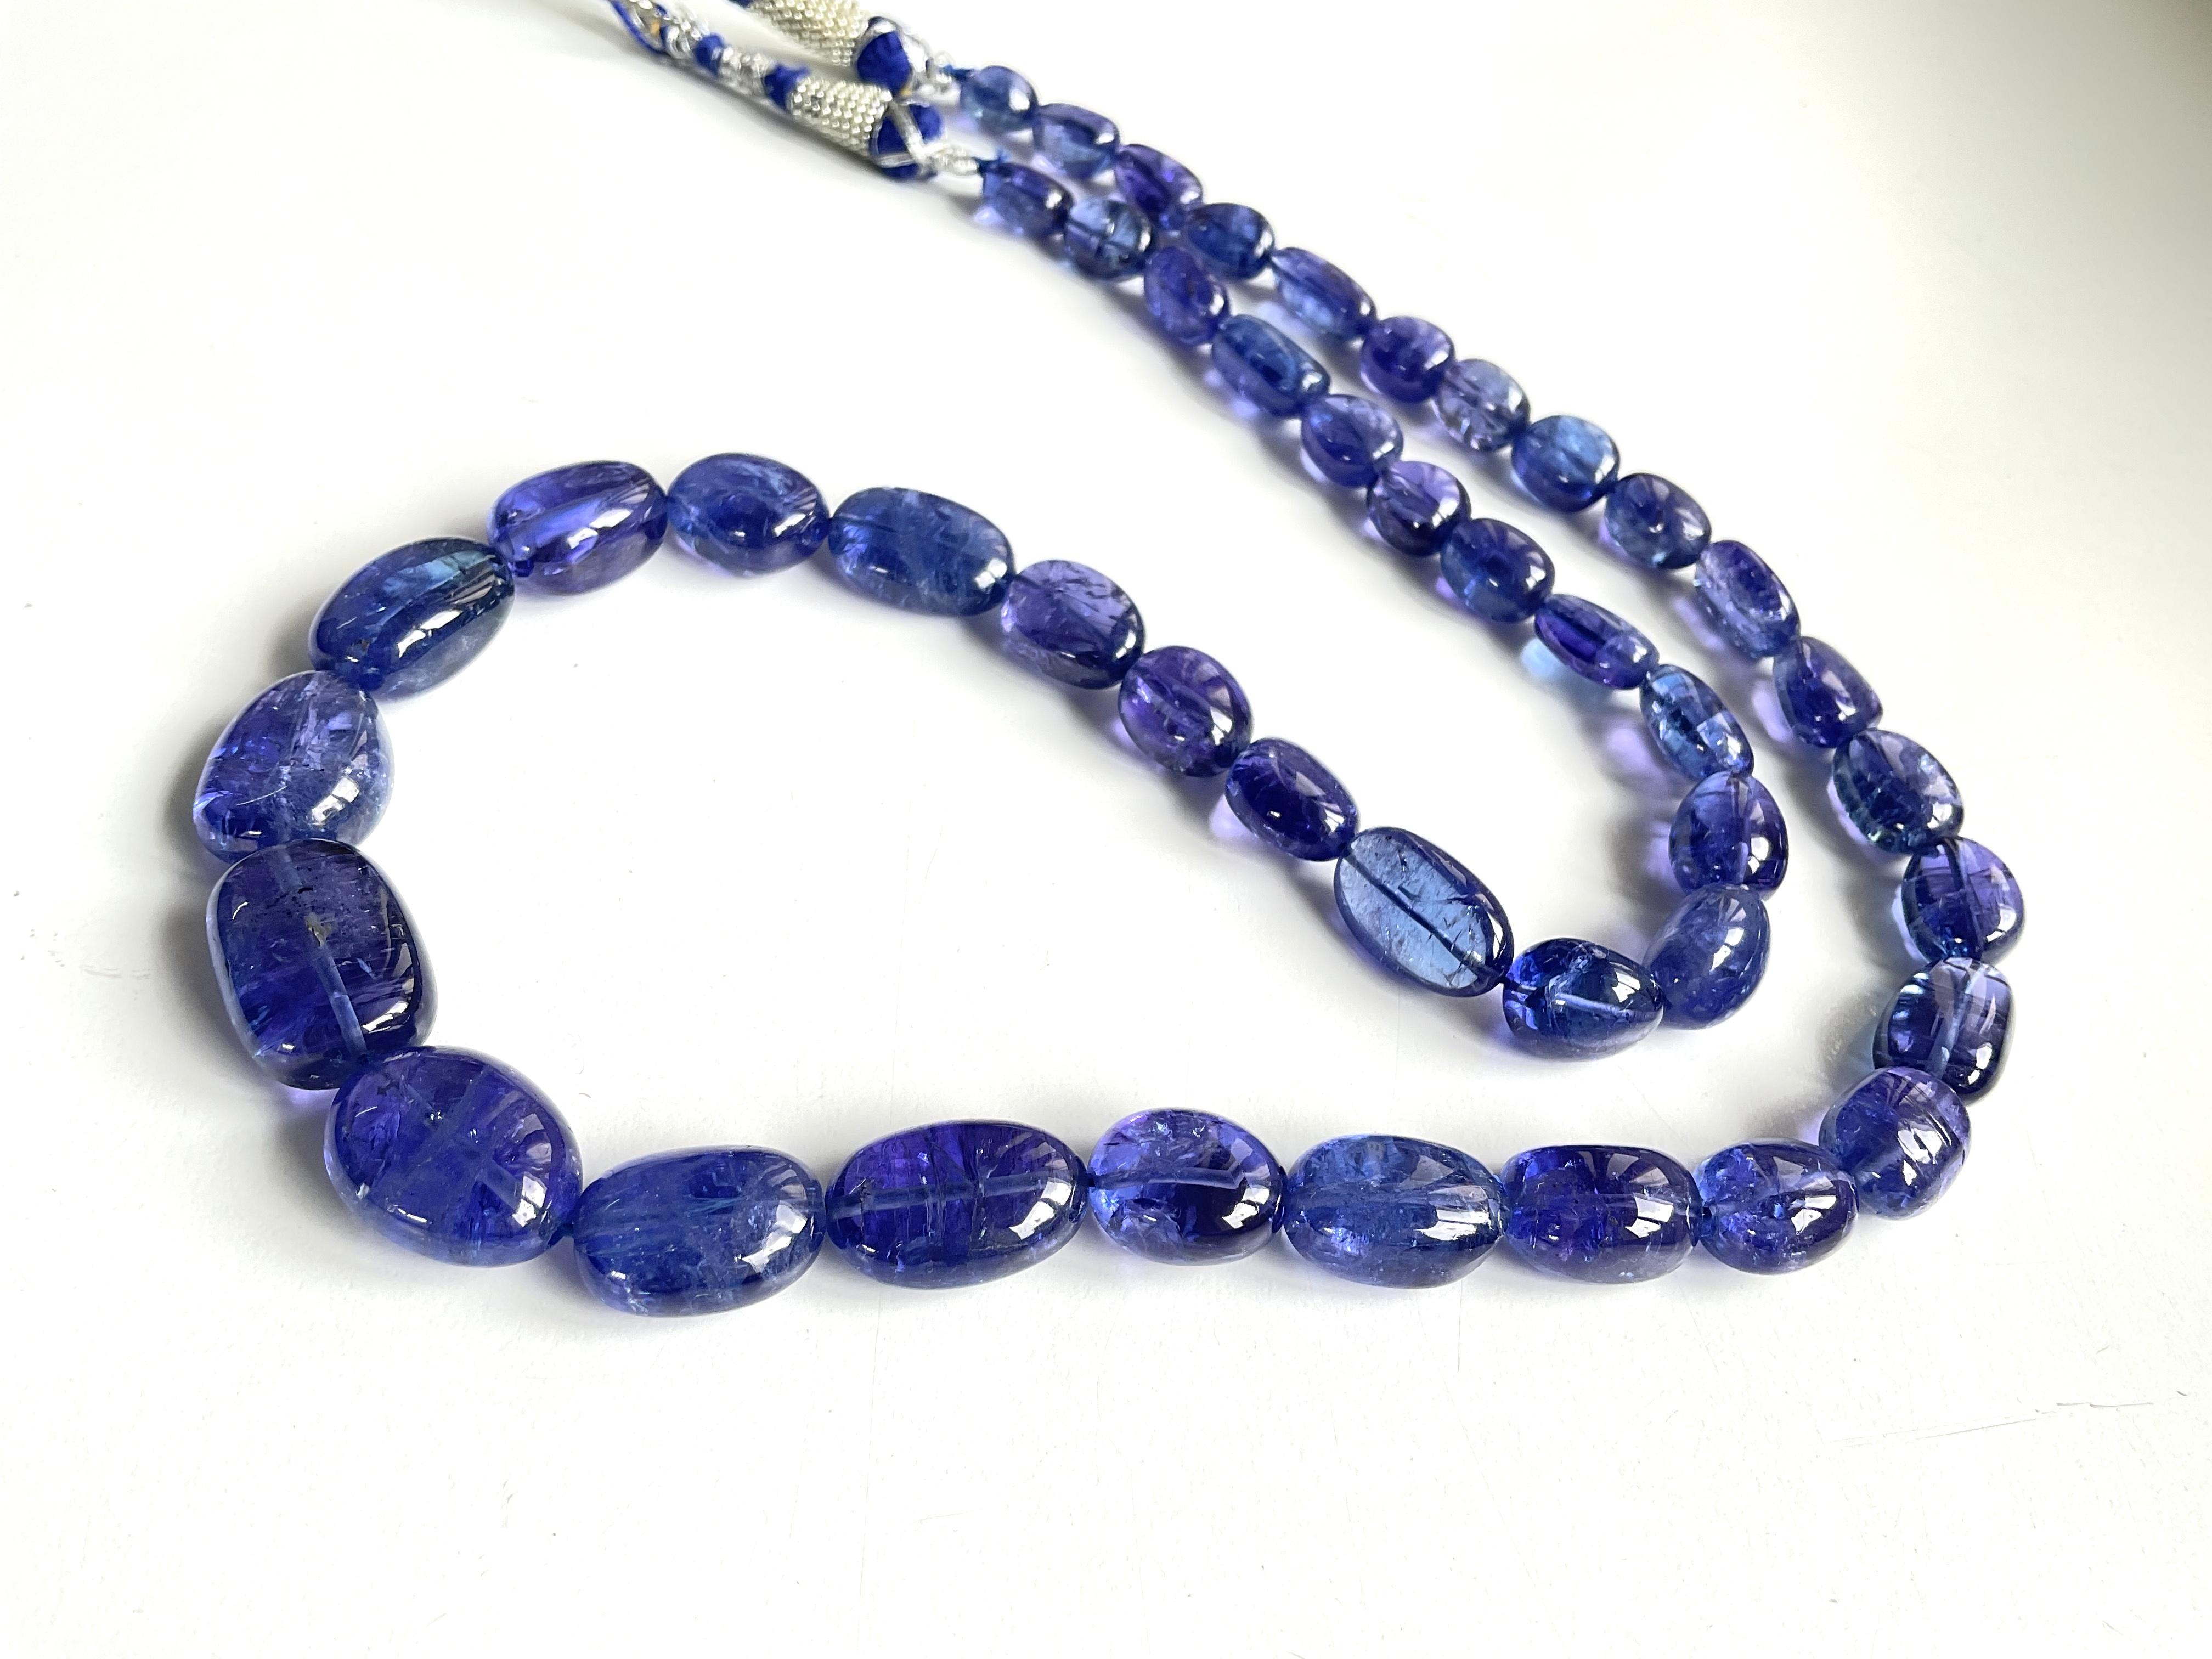 461.15 Carats Tanzanite Top Quality Tumbled necklace Fine Jewelry Natural Gems For Sale 3